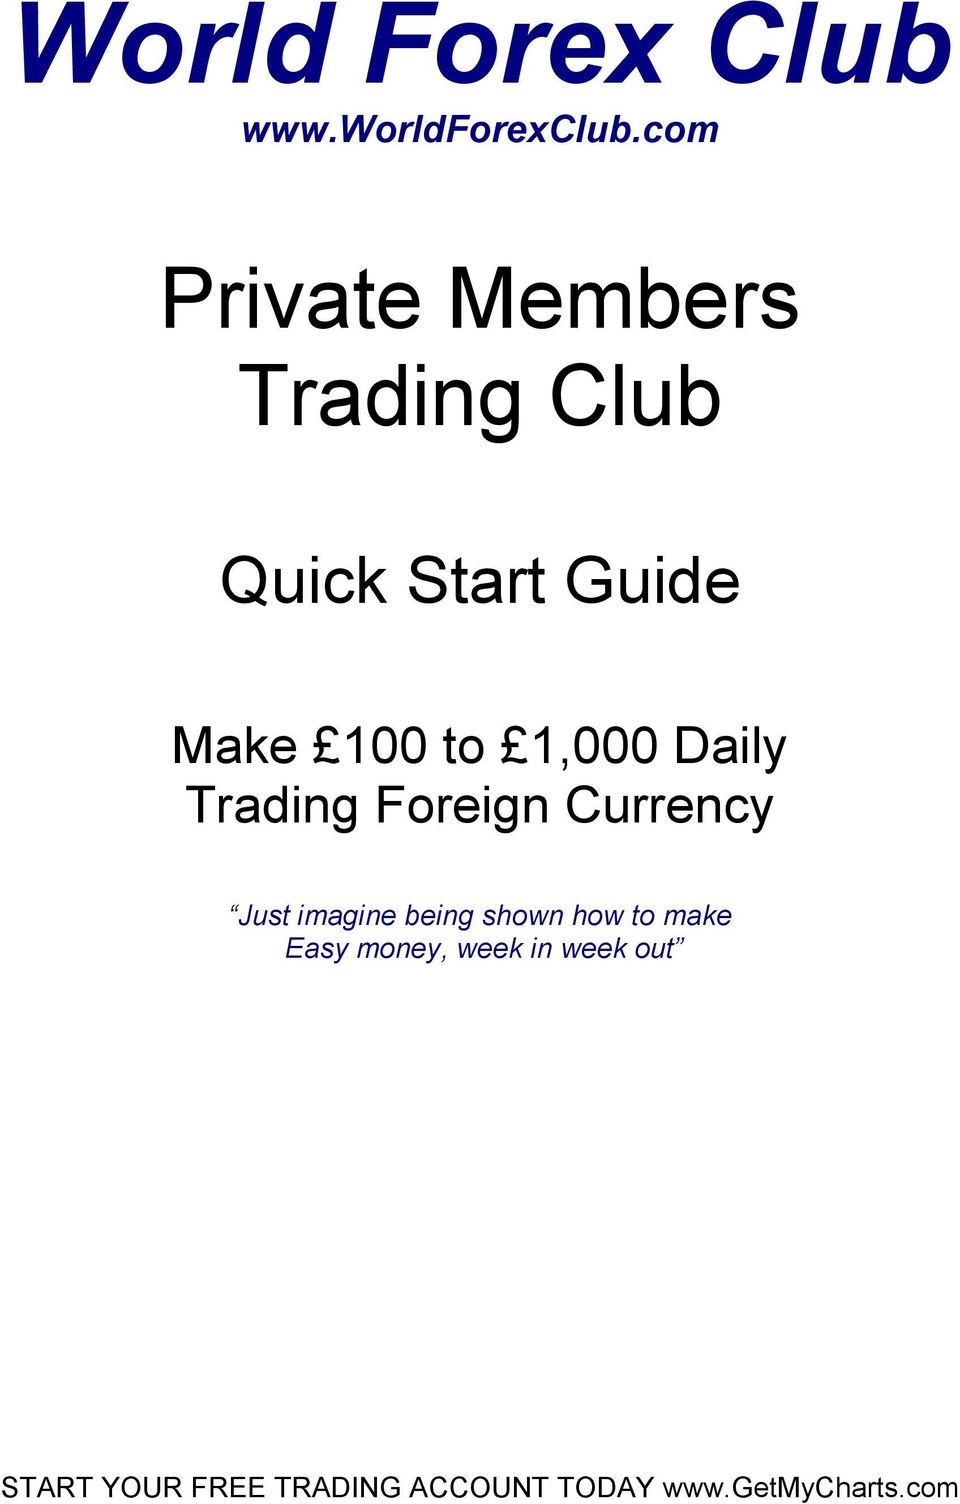 personal account at the forex club